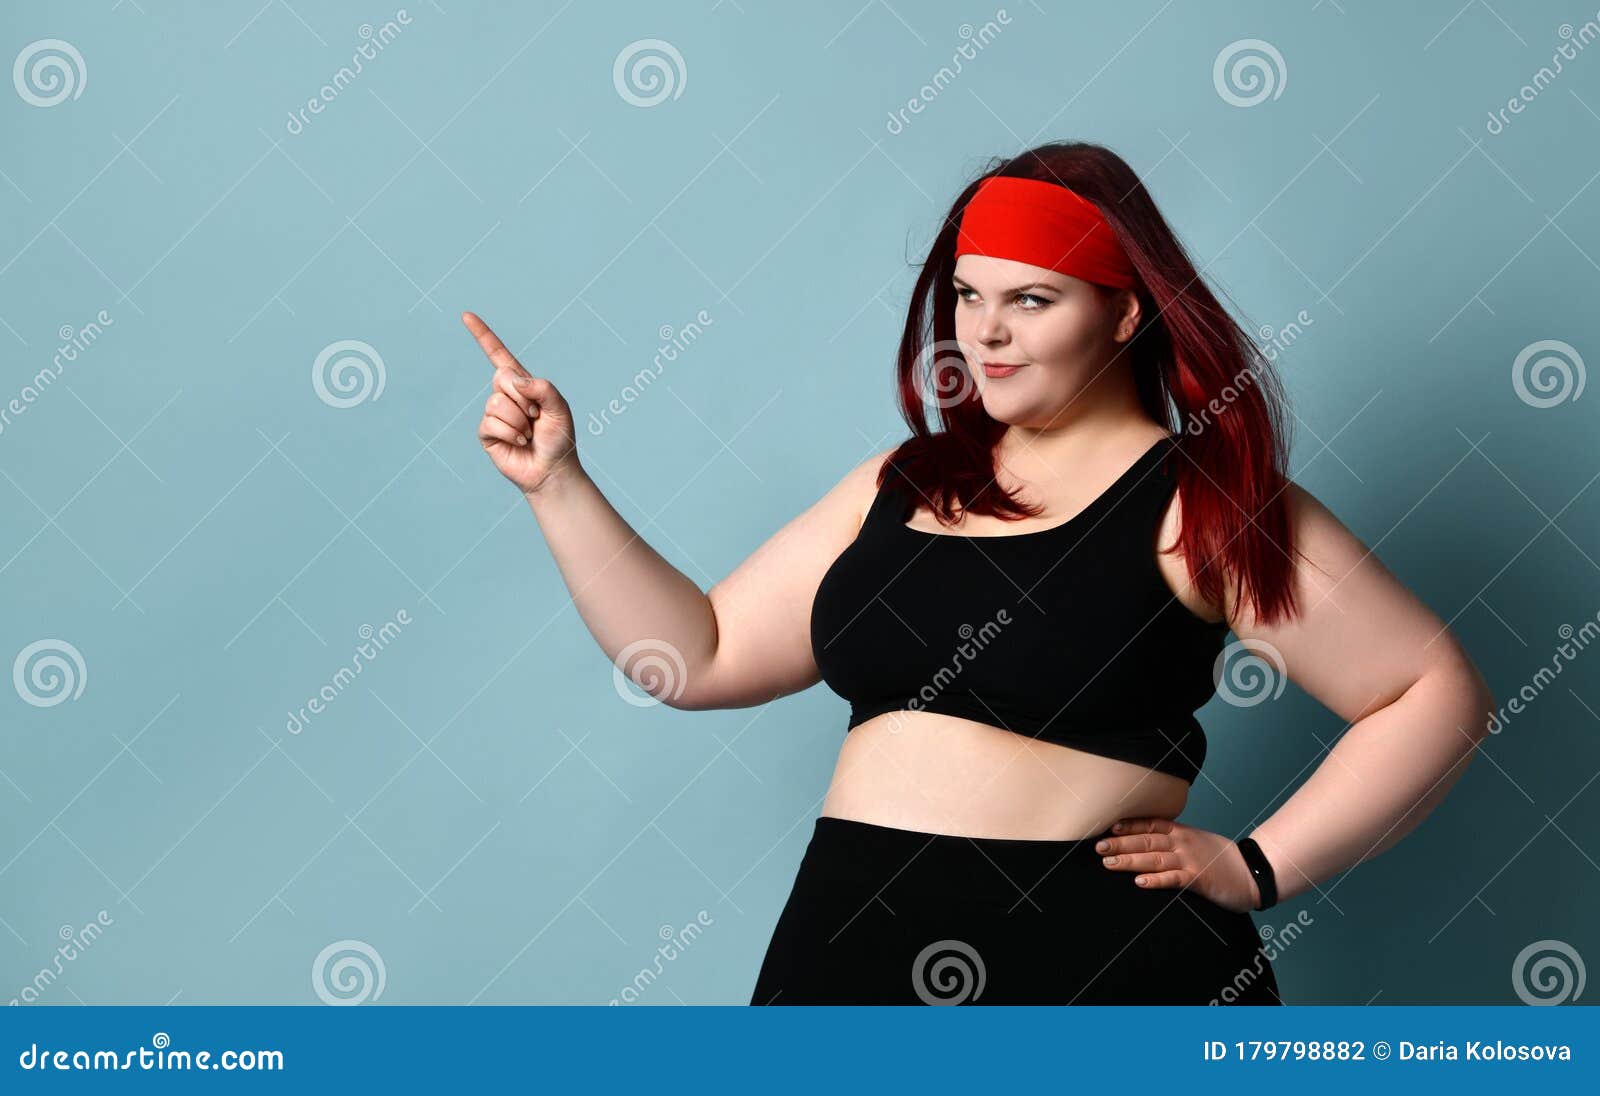 Overweight Redhead Woman in Red Headband, Black Top and Leggings. she ...